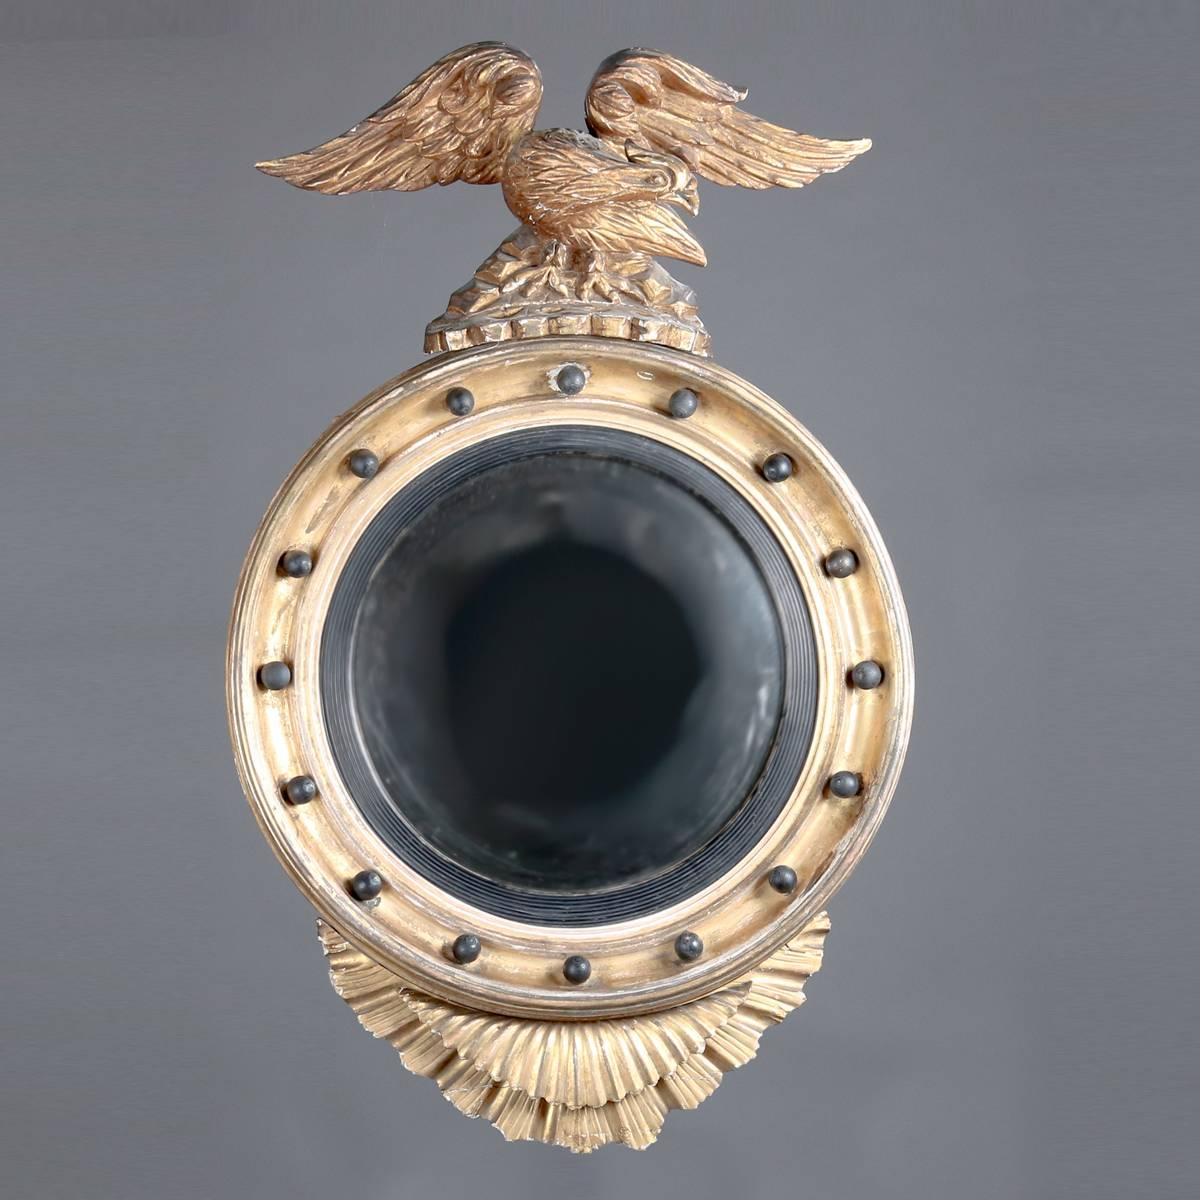 Antique Federal giltwood bullseye wall mirror features spread eagle crest and stylized fanned tail feather apron, ebonized highlights, 19th century

Measures - 38